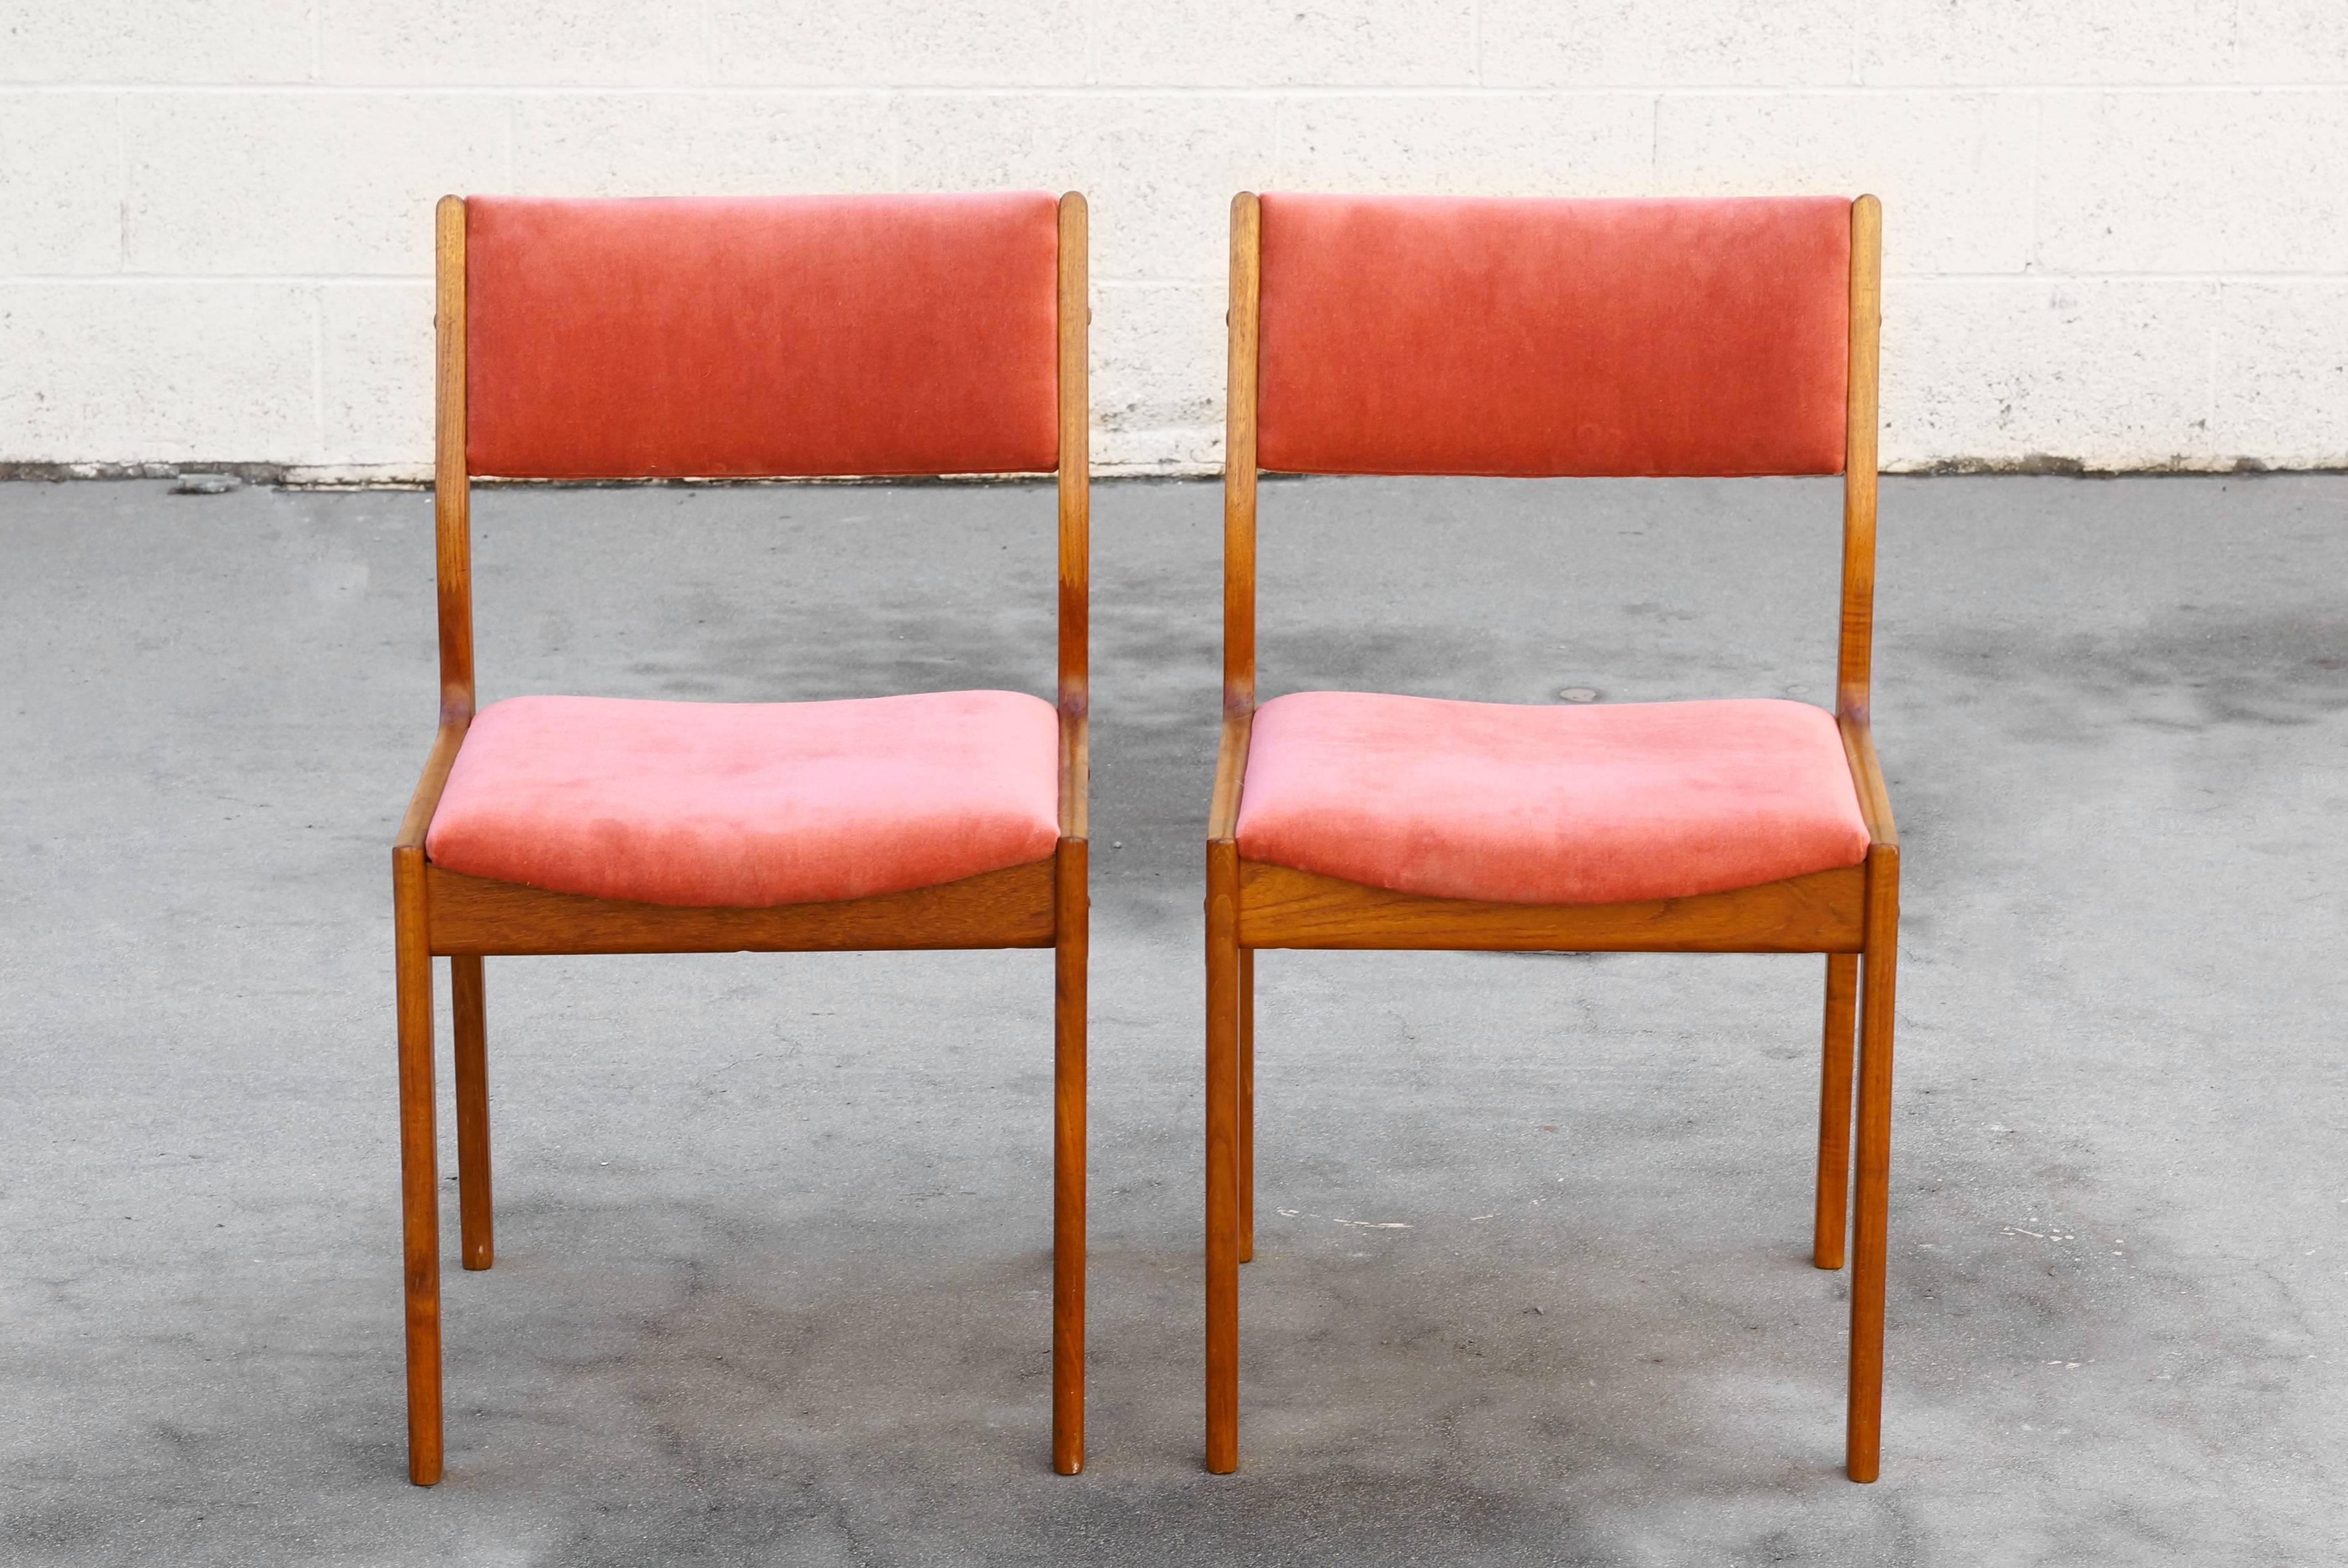 Beautifully designed Danish Modern style dining chairs, made in Singapore, circa 1960s. Reconditioned teak wood and reupholstered seats in high quality velvet. 

Dimensions: 18